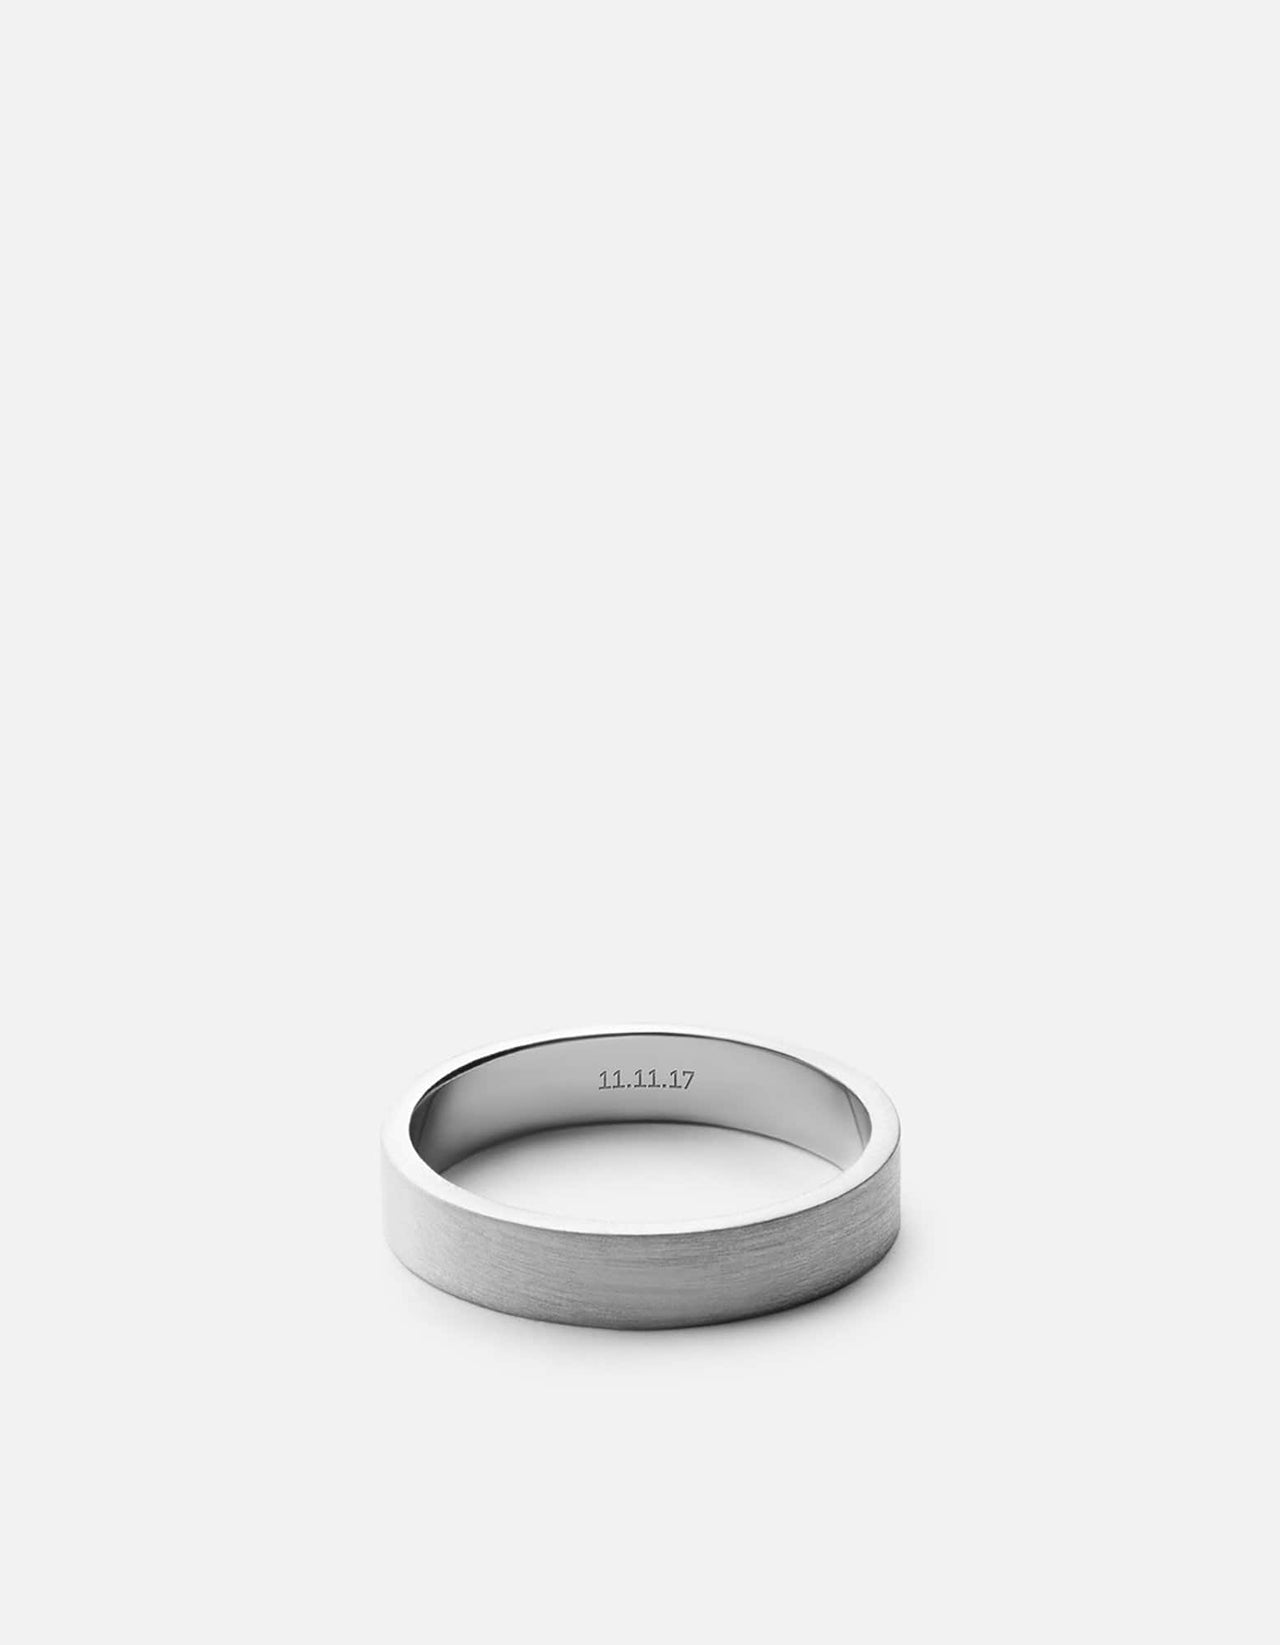 Buy Patterned Silver Ring for Men Today! - Bhima Gold Online